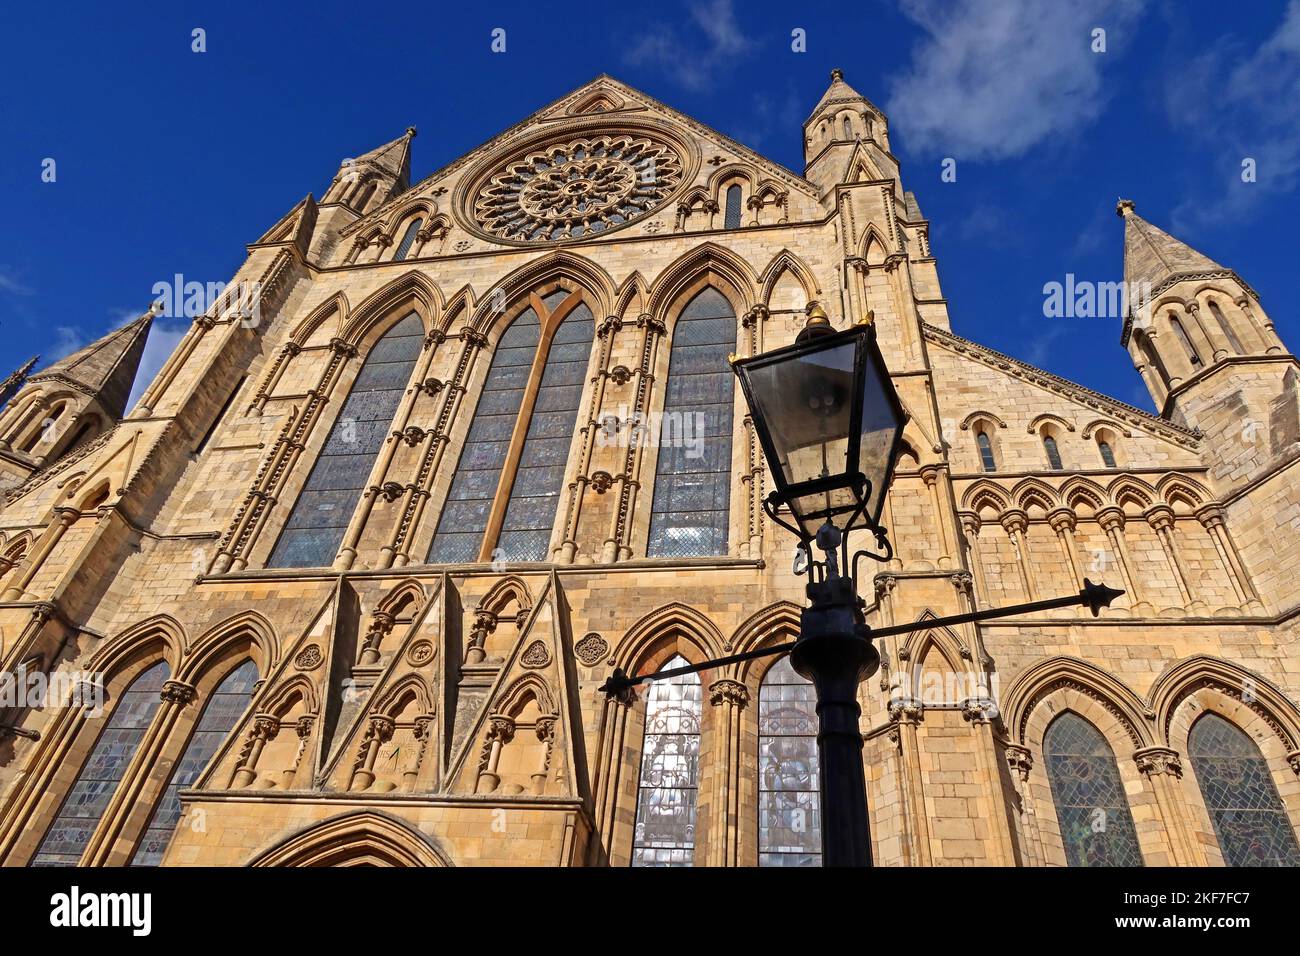 York Minster cathedral and old Victorian street lamp,  South Transept and main entrance, city of York, Yorkshire, England, UK, YO1 7LG Stock Photo